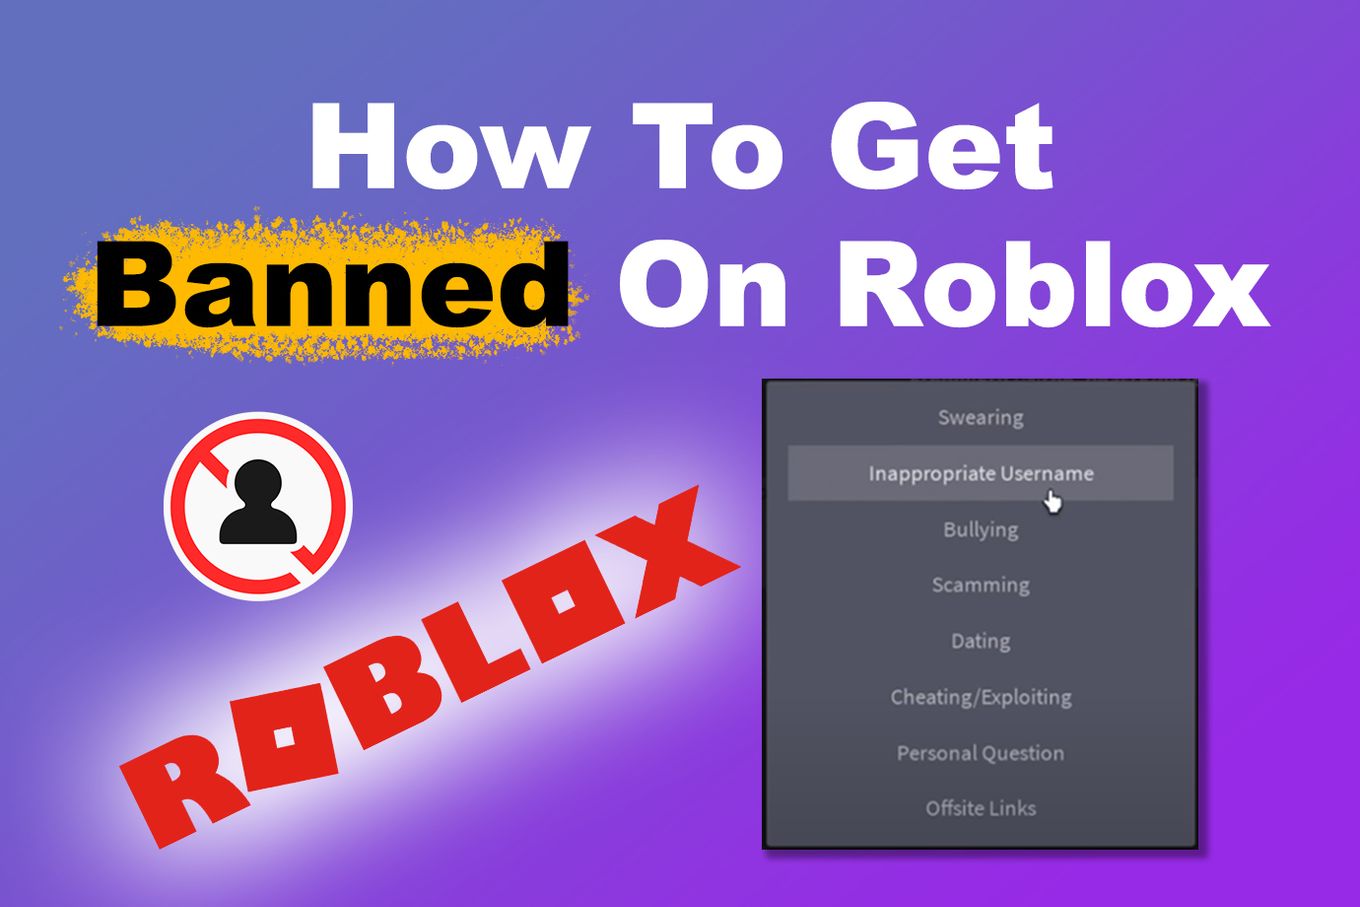 How To Get Banned On Roblox